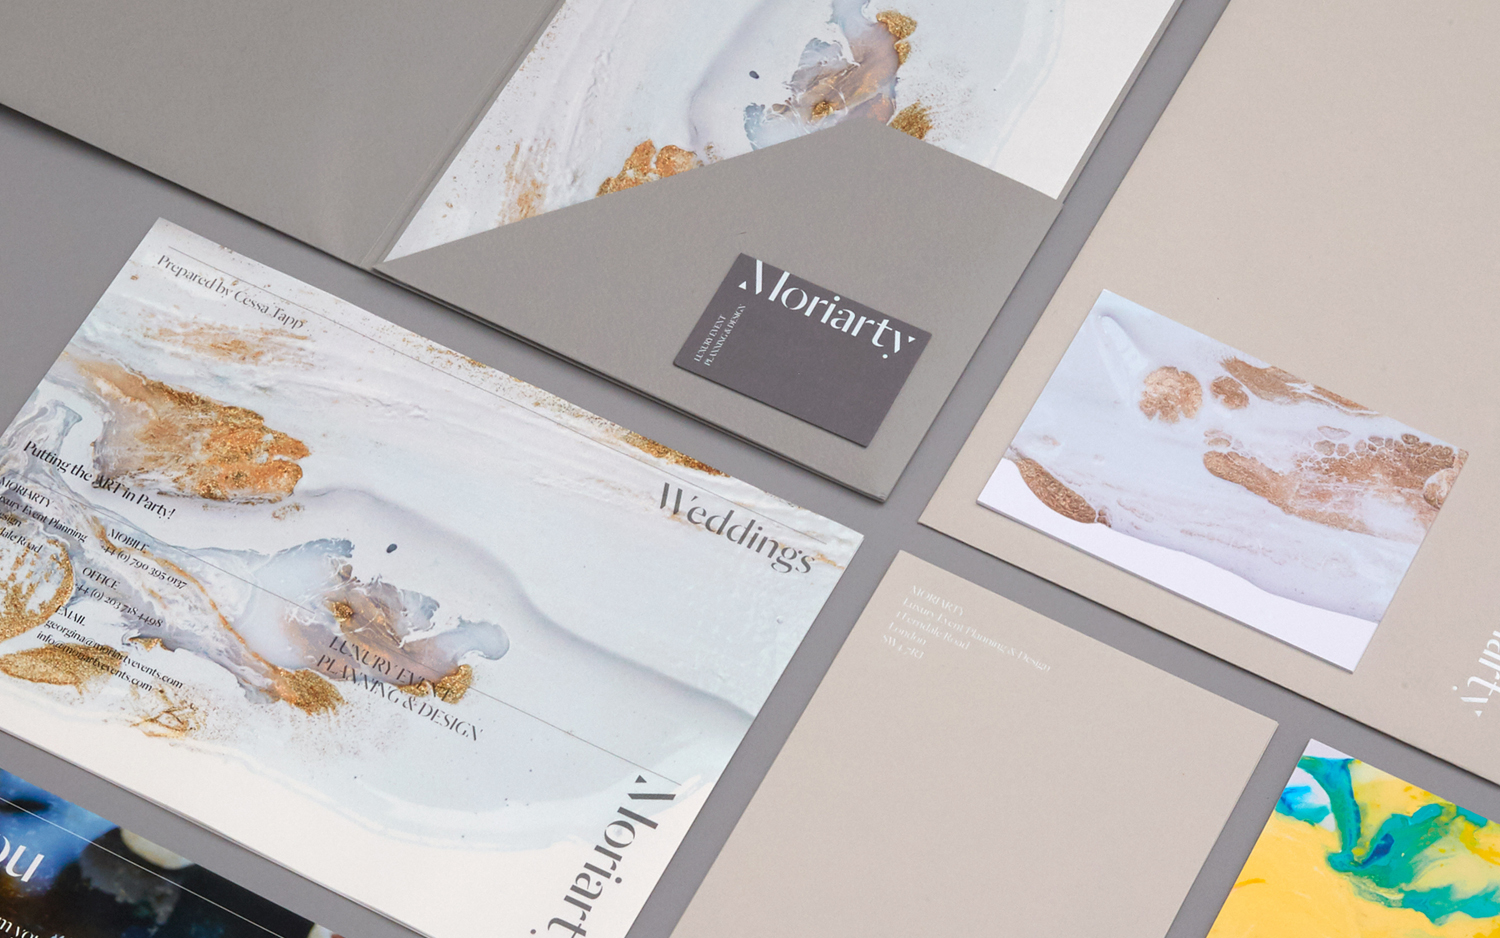 Visual identity, stationery and pitch documents designed by Bond for London-based event planning business Moriarty